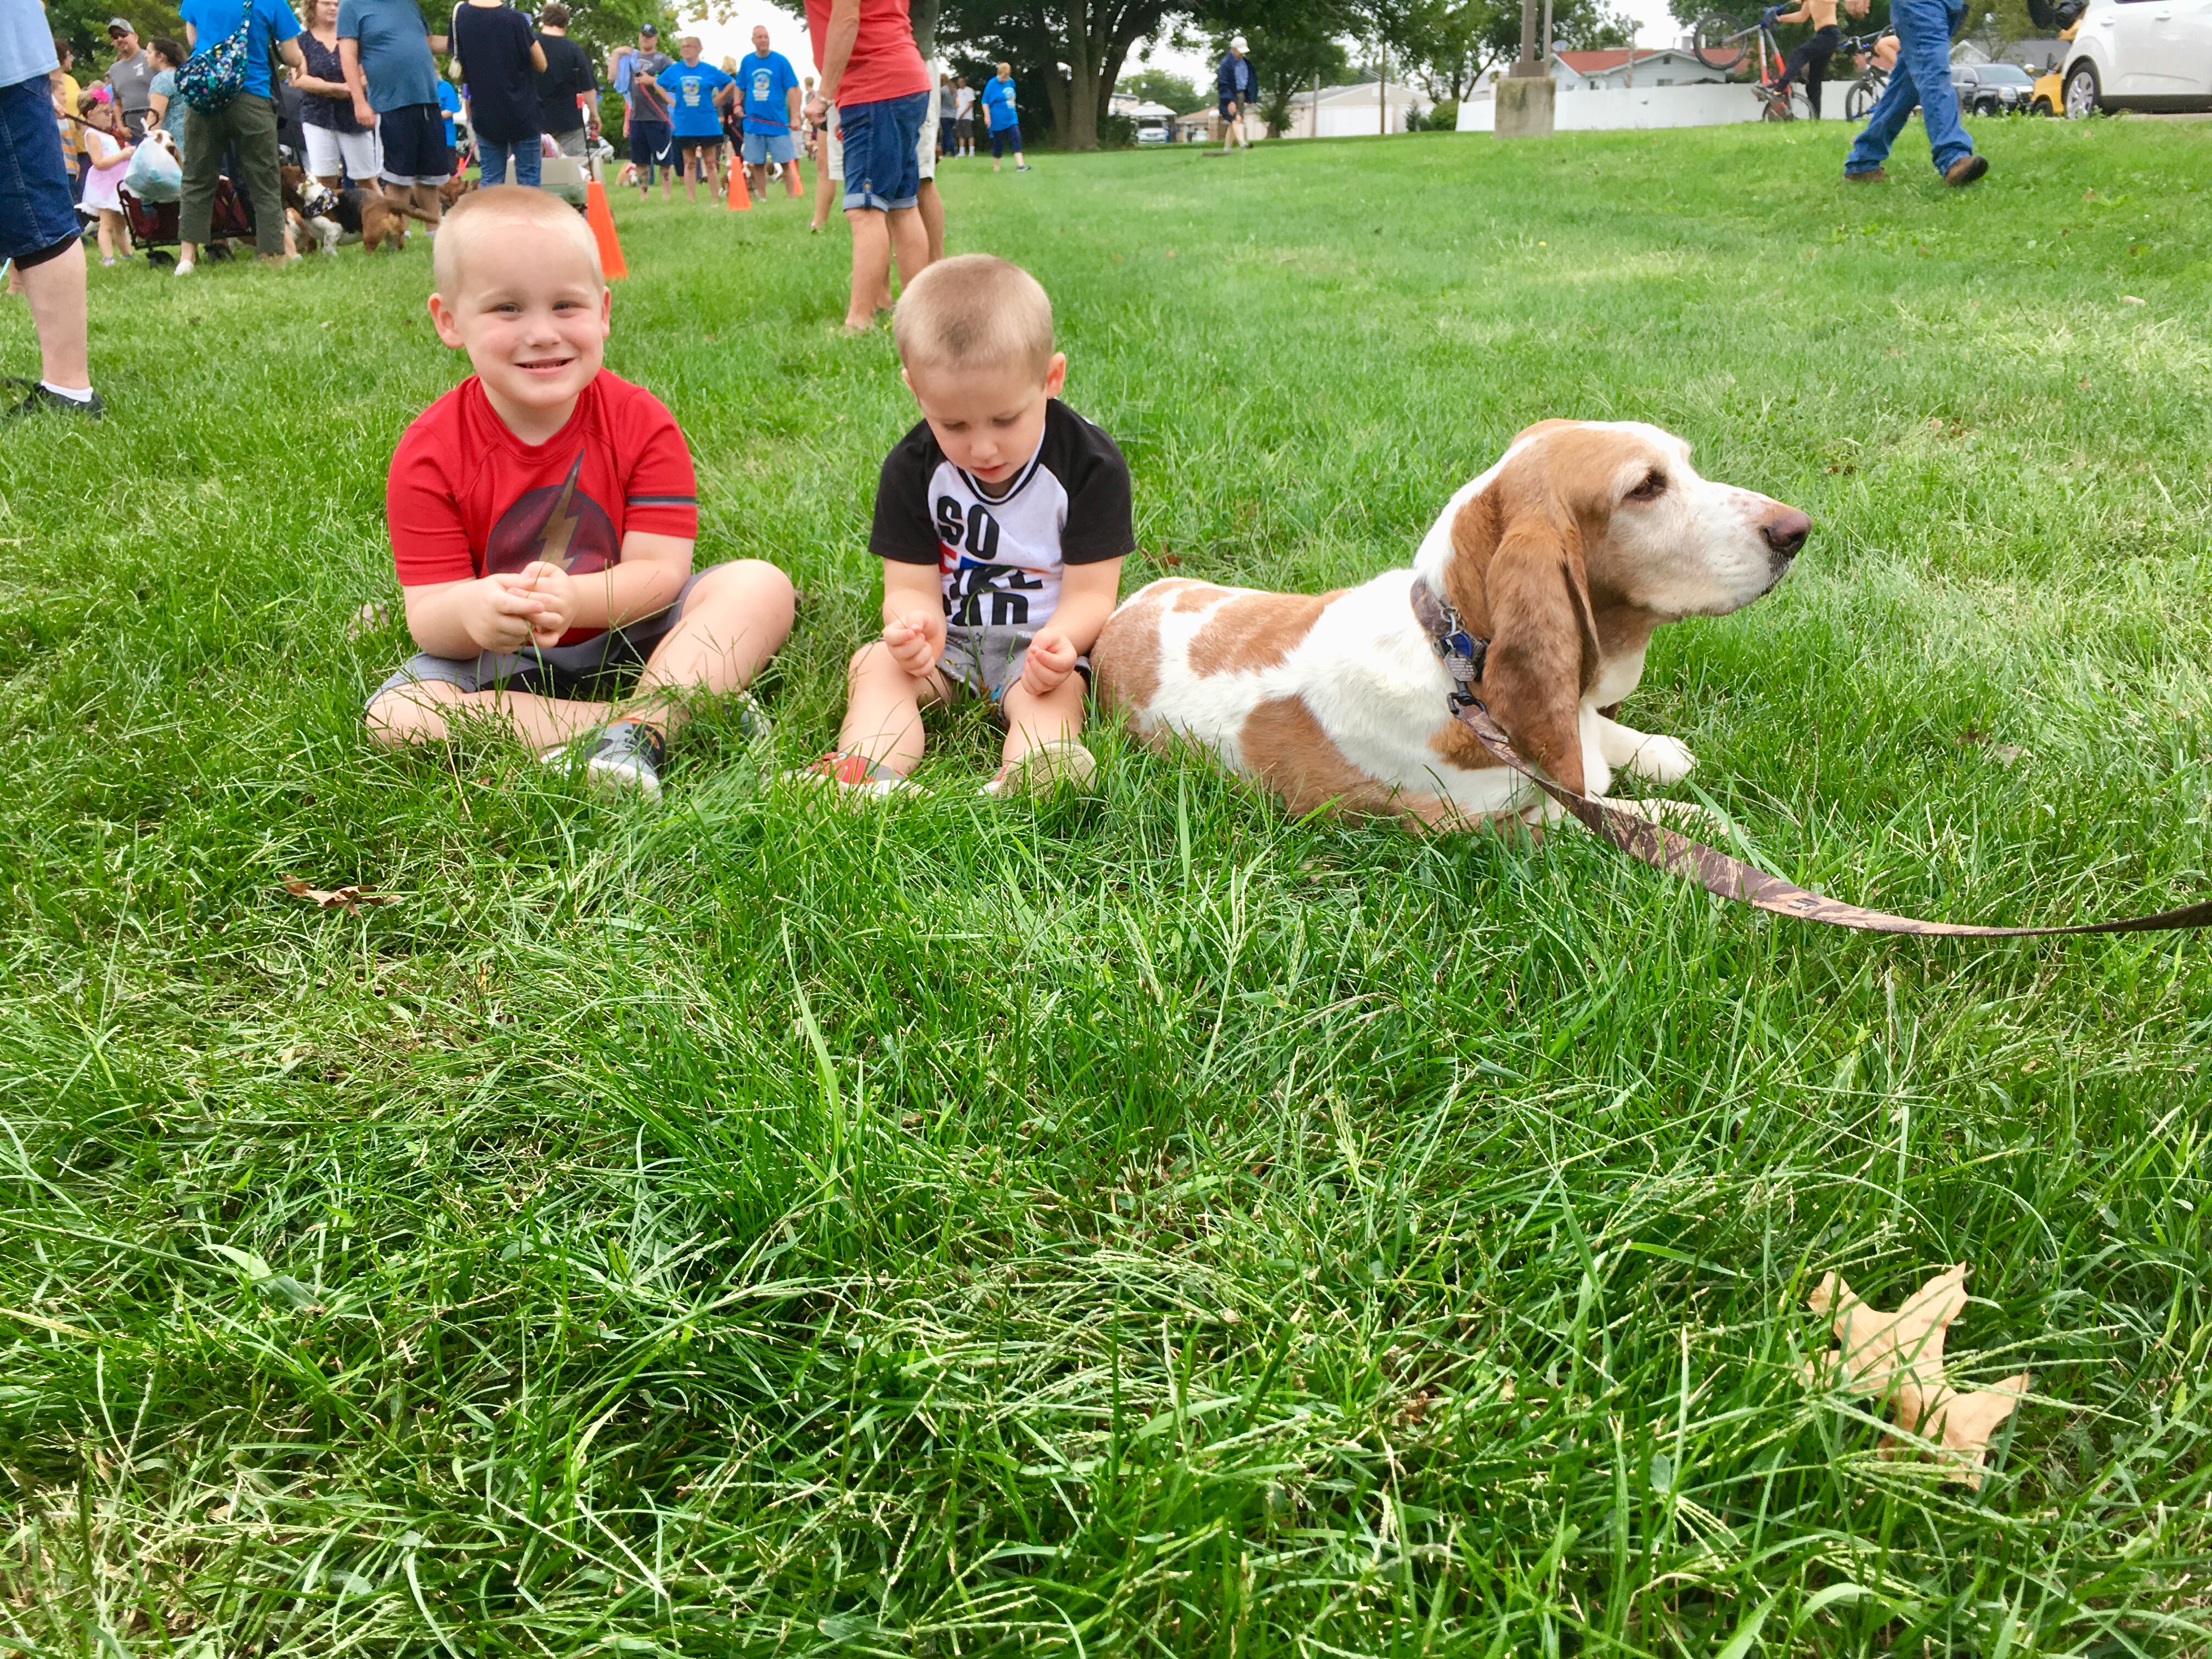 Basset Bash and Waddle in Dwight, Illinois - Circle City Adventure Kids